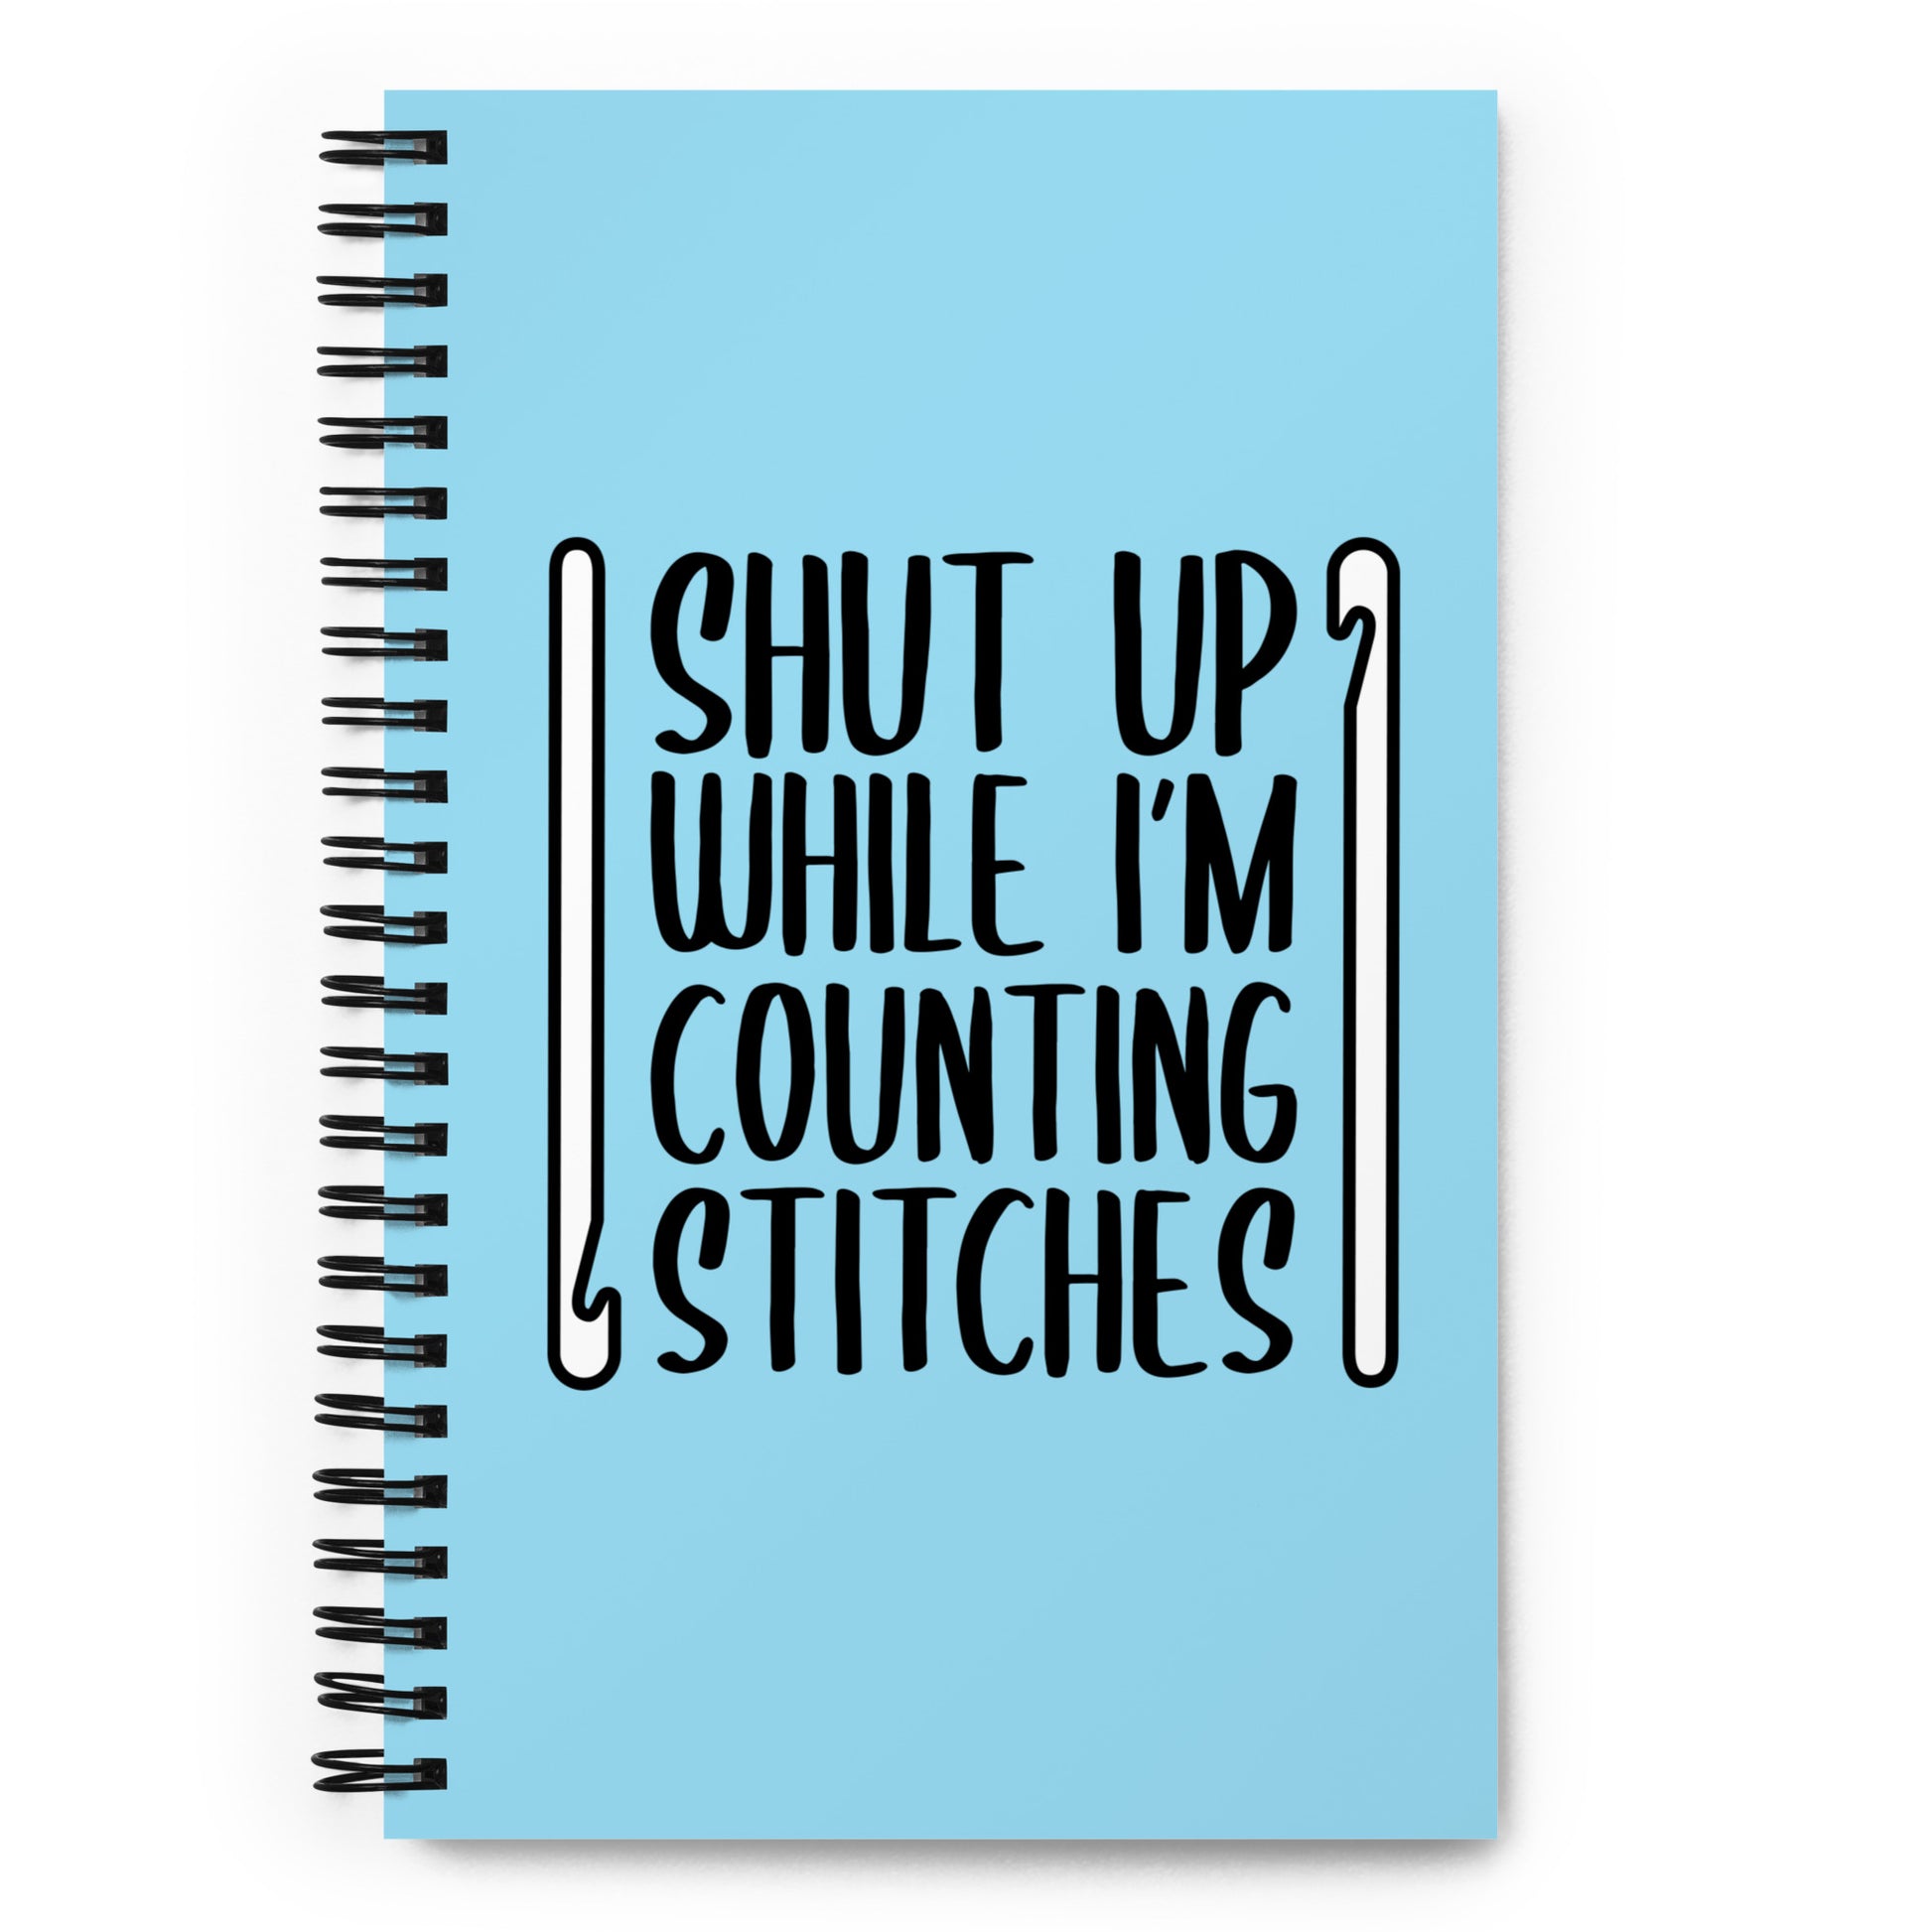 A light blue o-ring bound notebook featuring black text that reads "Shut up while I'm counting stitches." The text is framed by a crochet hook to the left and right.